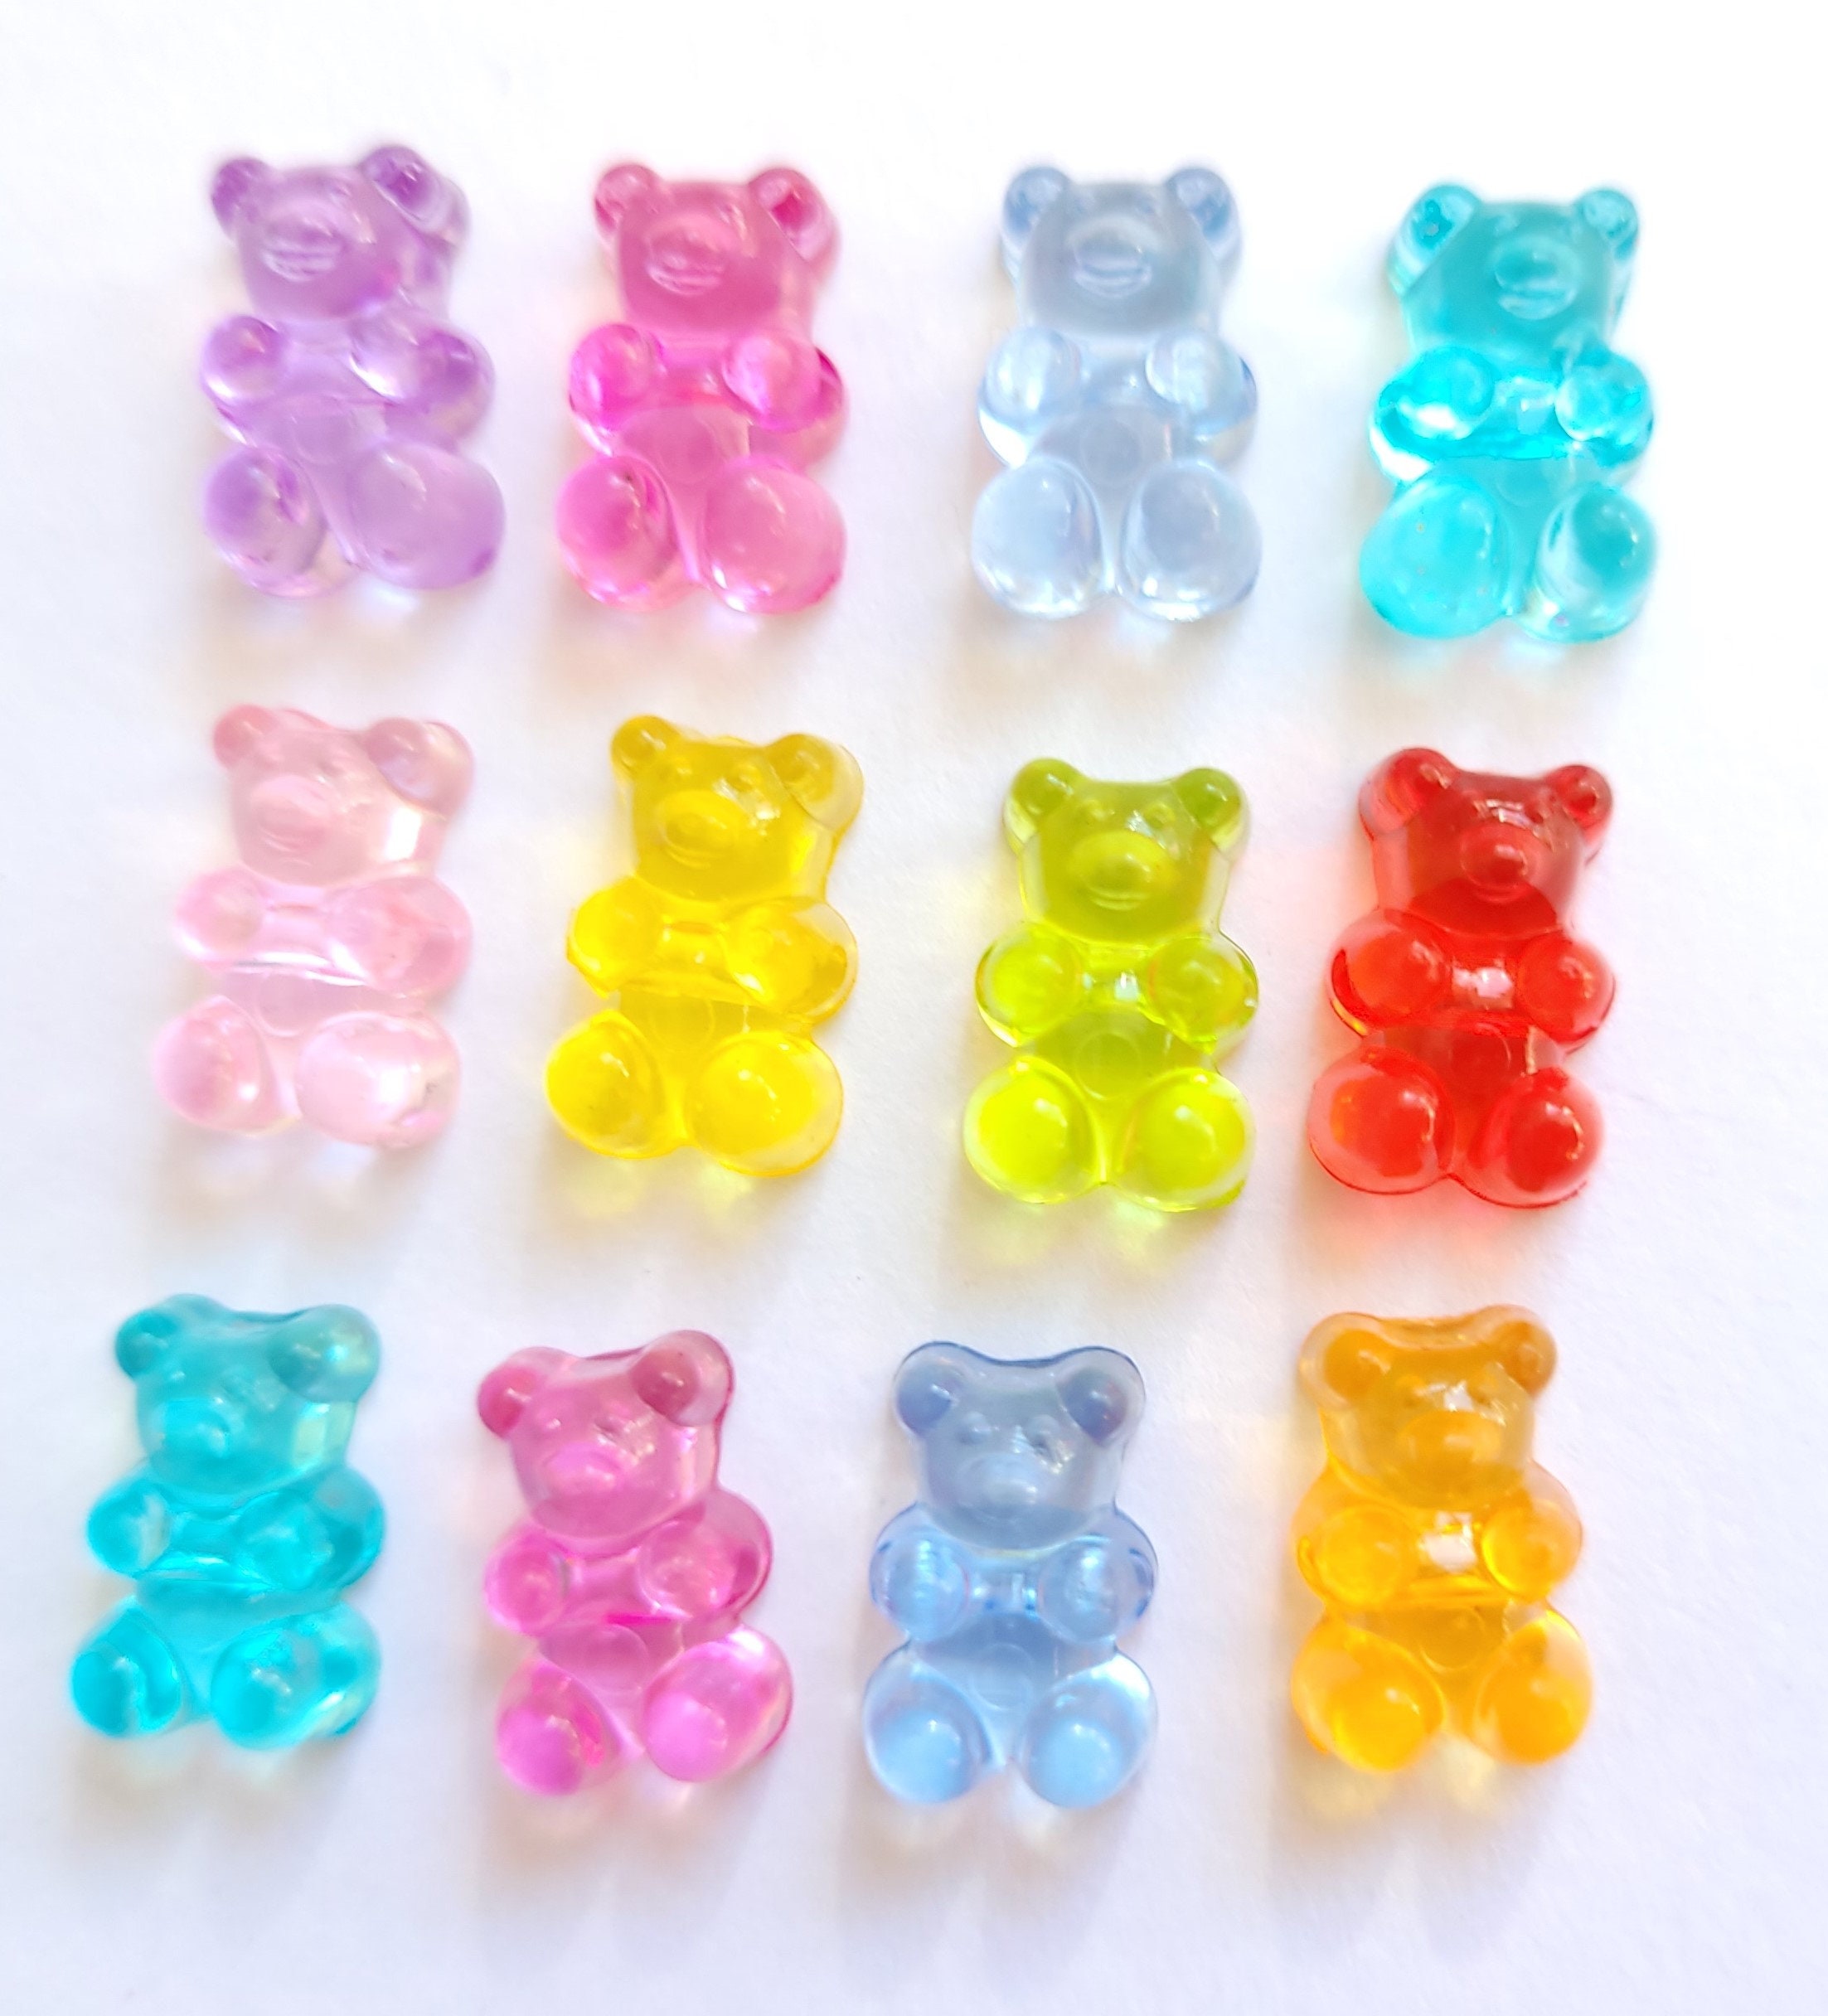 Translucent Gummy Bear Beads in Pastel Colors by Madison Beads - Playful  Addition to Your Jewelry and Craft Projects